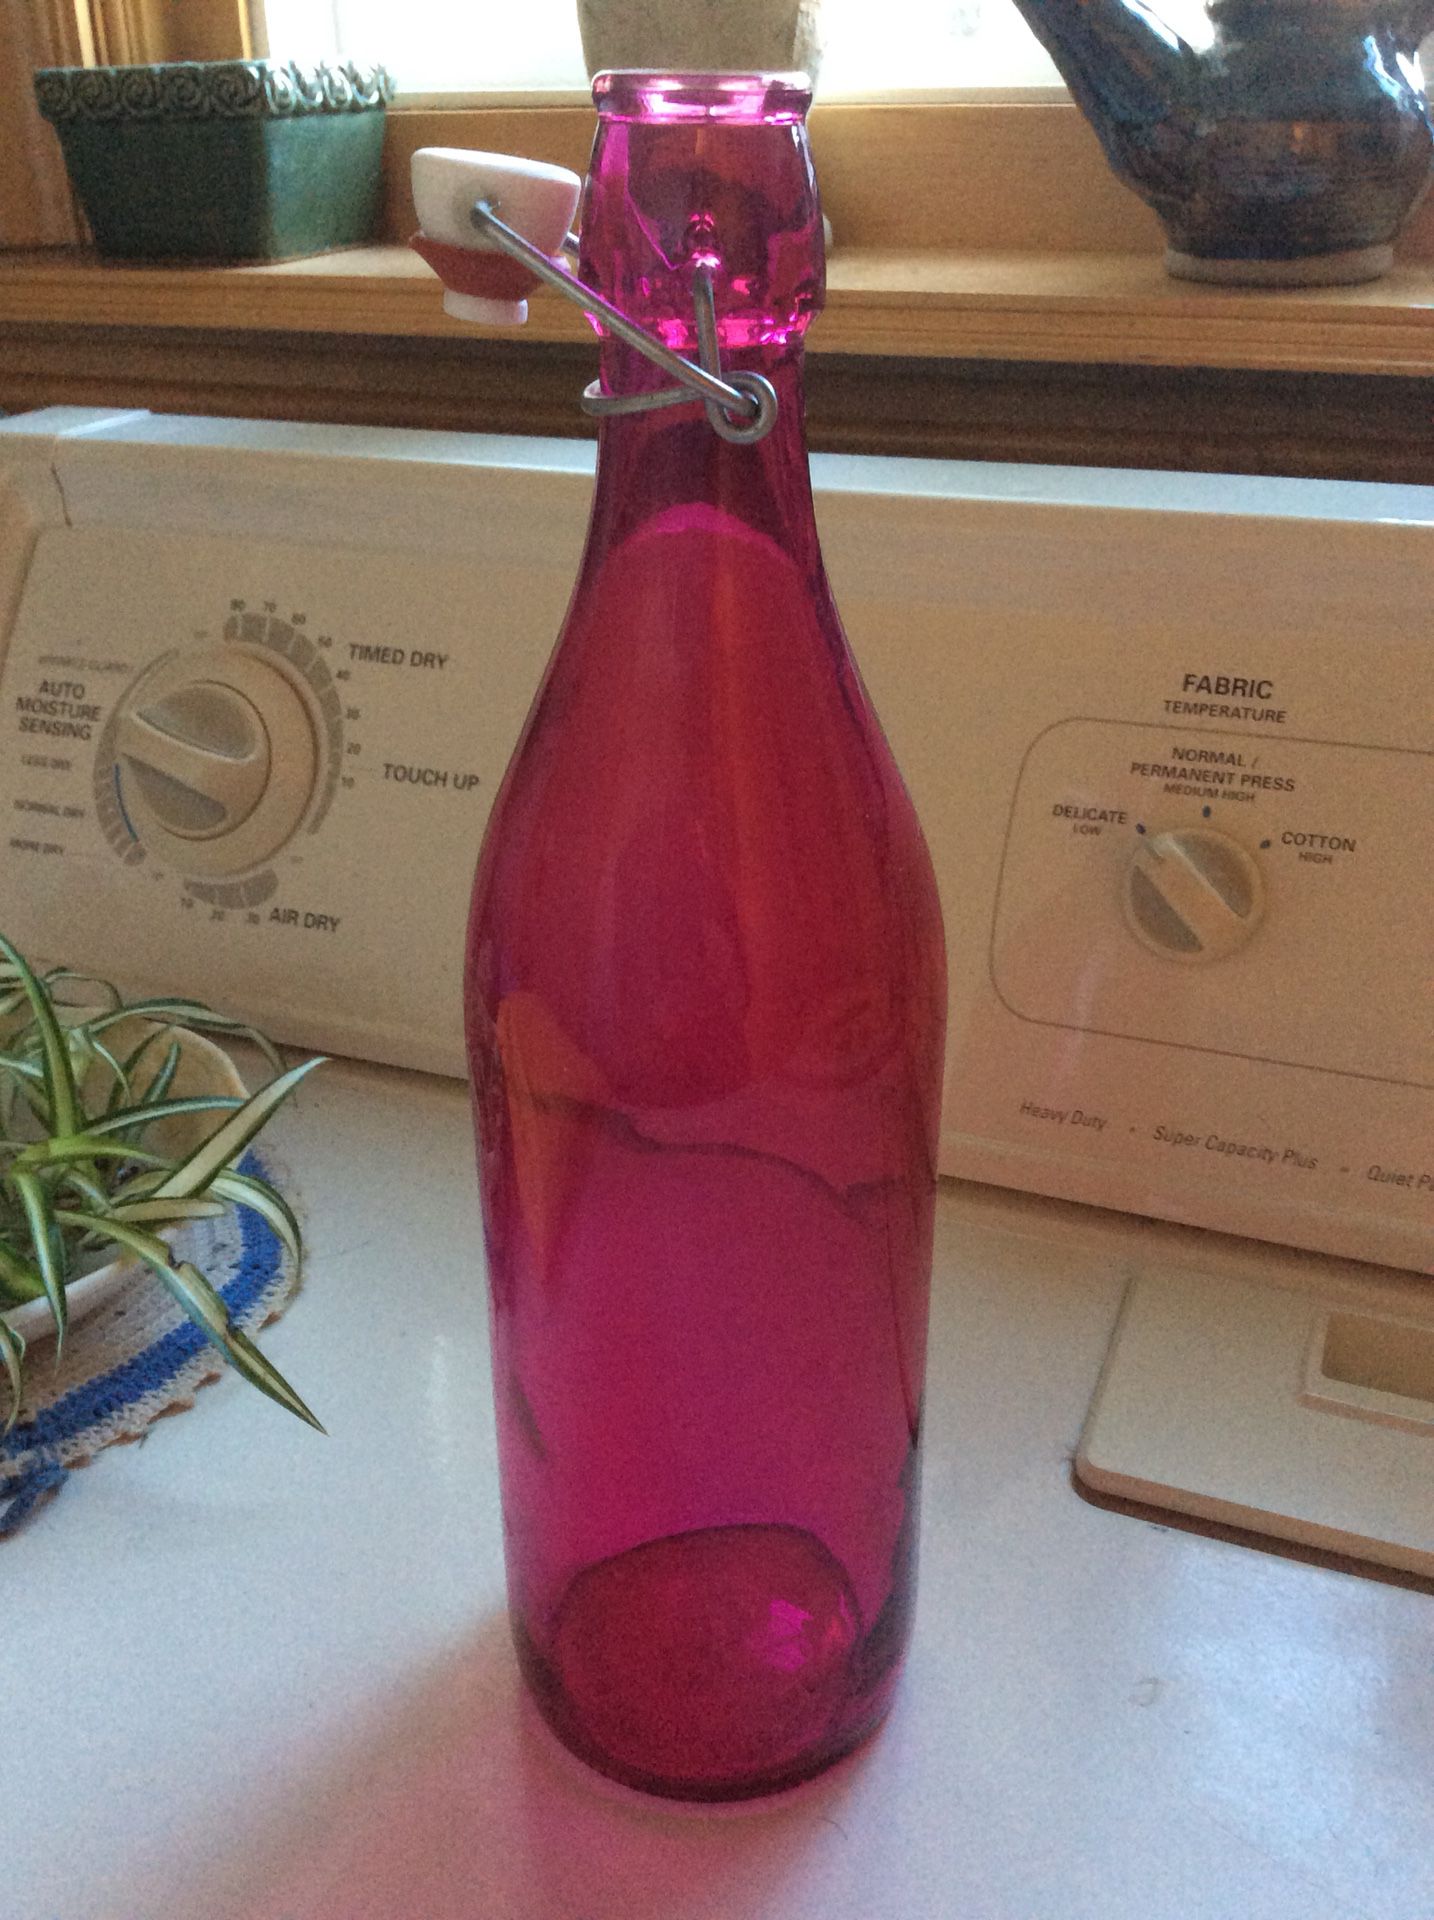 Bormioli Rocco made in Italy pink glass bottle with bale wire swing lid